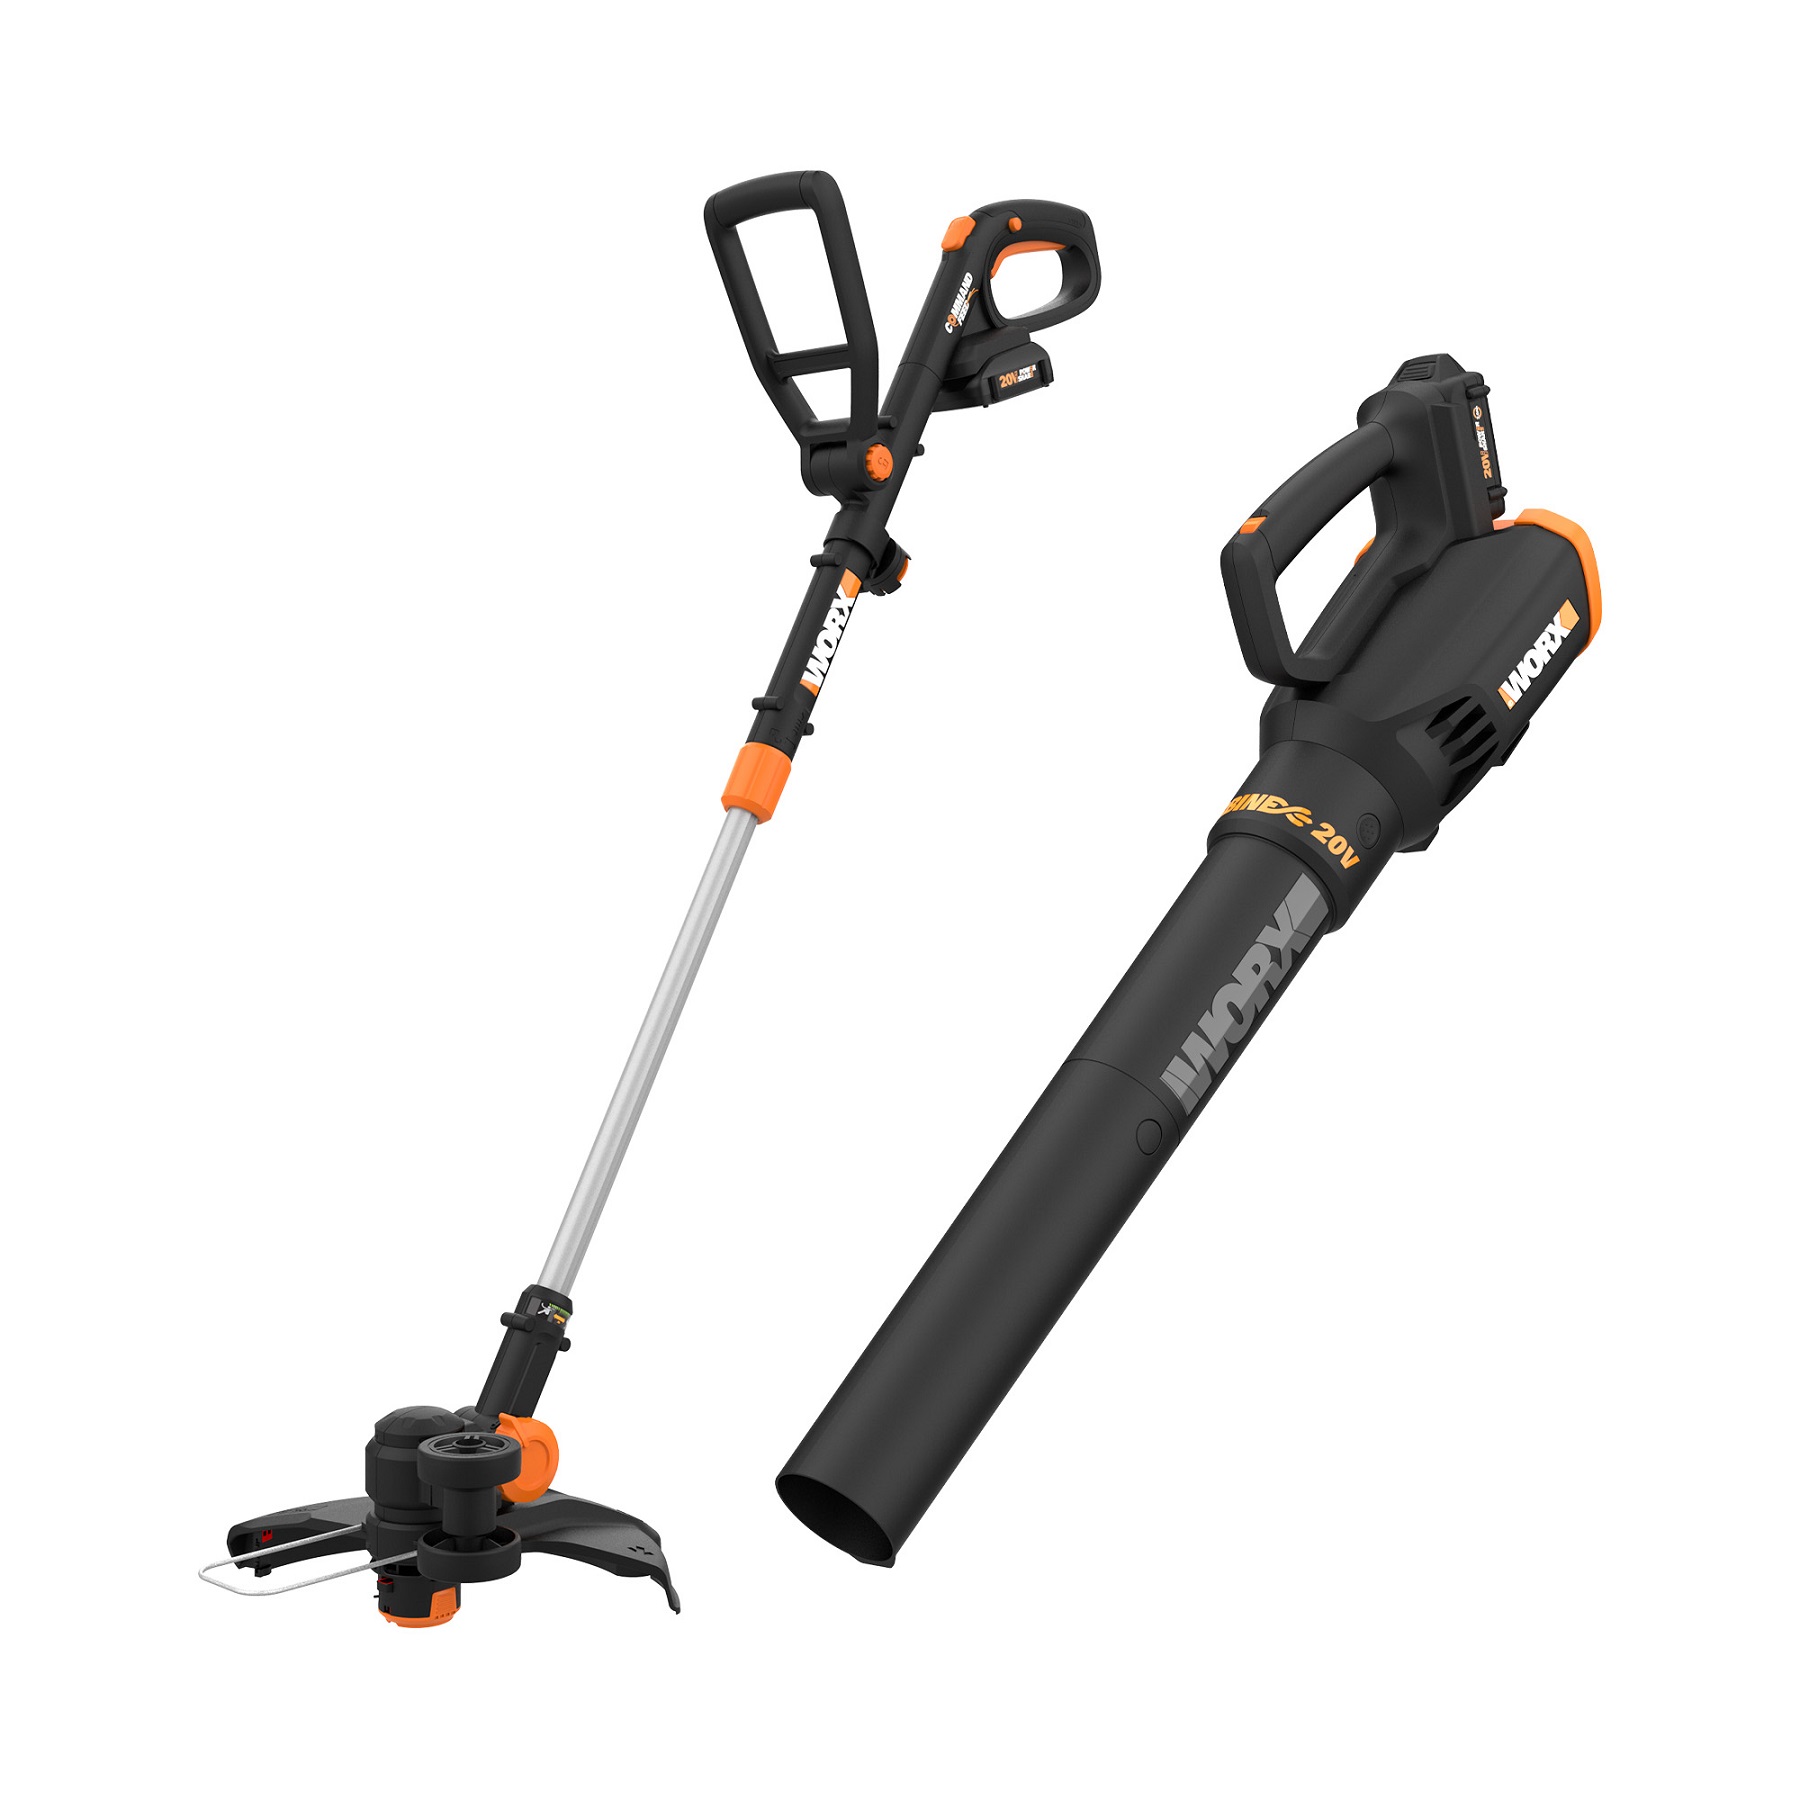 WORX 20V GT Revolution Trimmer/Blower Combo and 40V Hydroshot Featured in Mid-Summer Amazon Prime Days